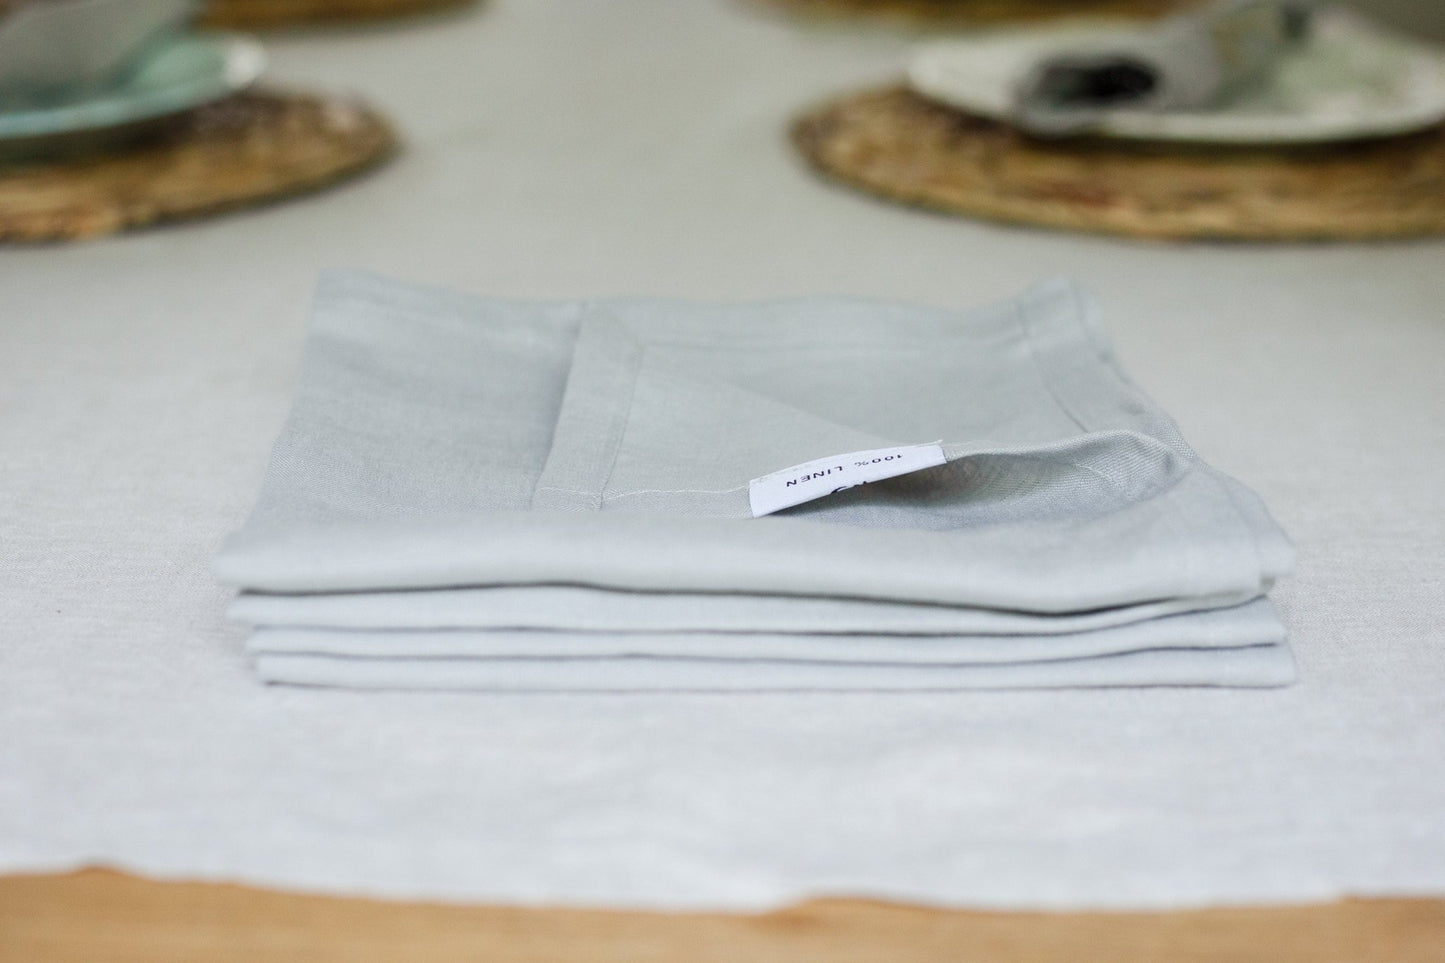 Load image into Gallery viewer, Natural Soft Kitchen Linen Napkin Set of 2 | Handmade Soft Linen Napkin Set | Linen Napkins Fall Kitchen Decor | Table Decor | Table Linens
